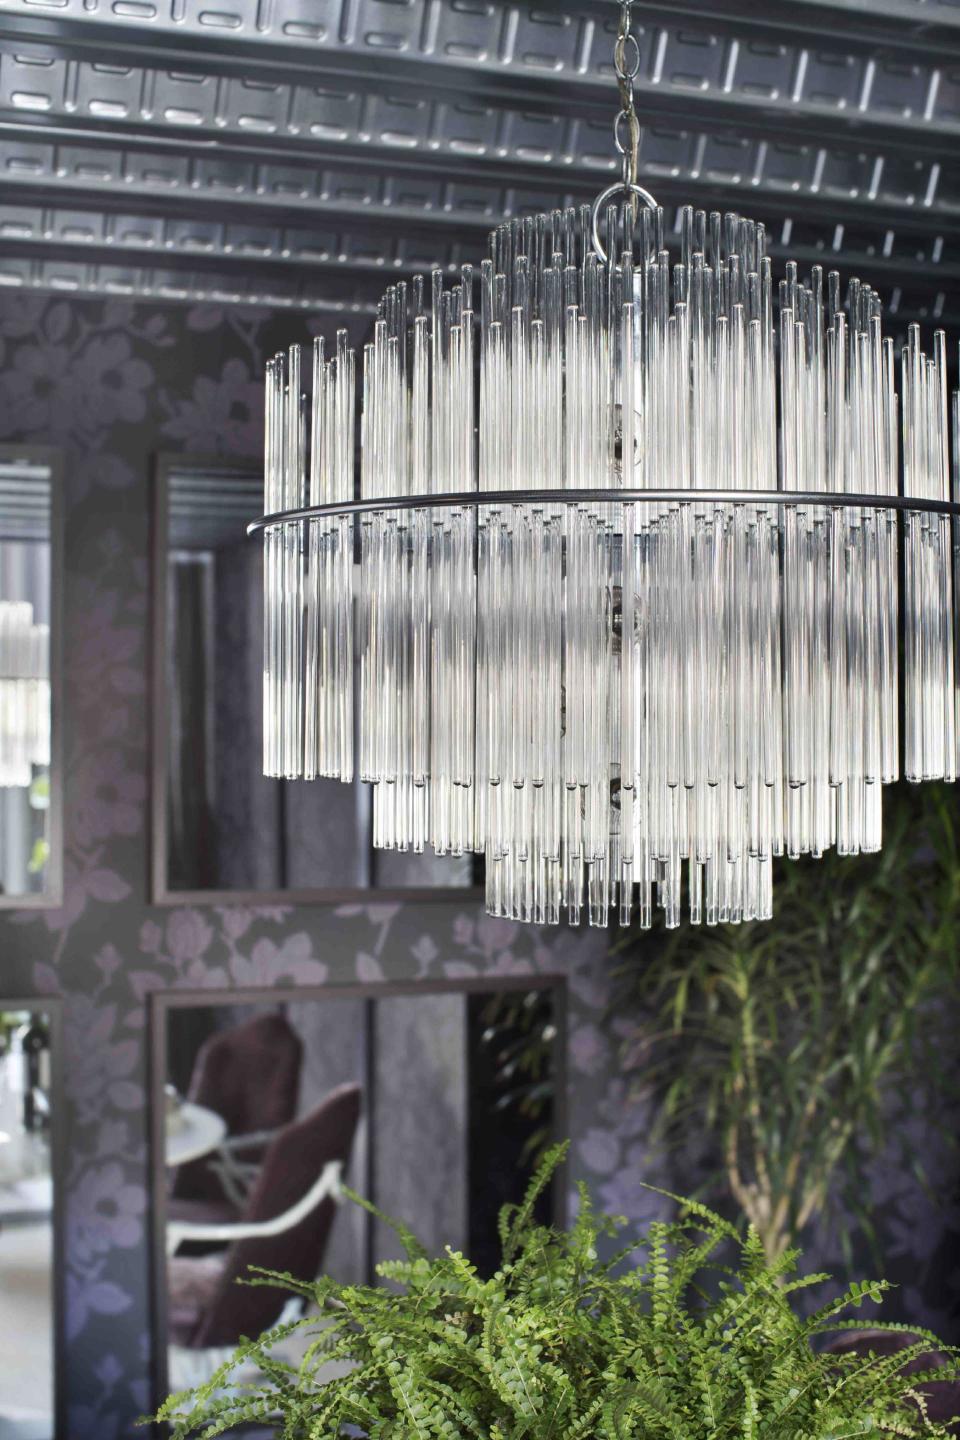 In this photo provided by Brian Patrick Flynn, to ensure safety, the designer Flynn had this 1960s era glass and chrome chandelier found for $150 at a flea market rewired before installing it in a dining room. Flynn suggests always splurging on electrical and upholstery updates to add longevity to vintage finds. (AP Photo/Brian Patrick Flynn/Flynnside Out Blog, Sarah Dorio)